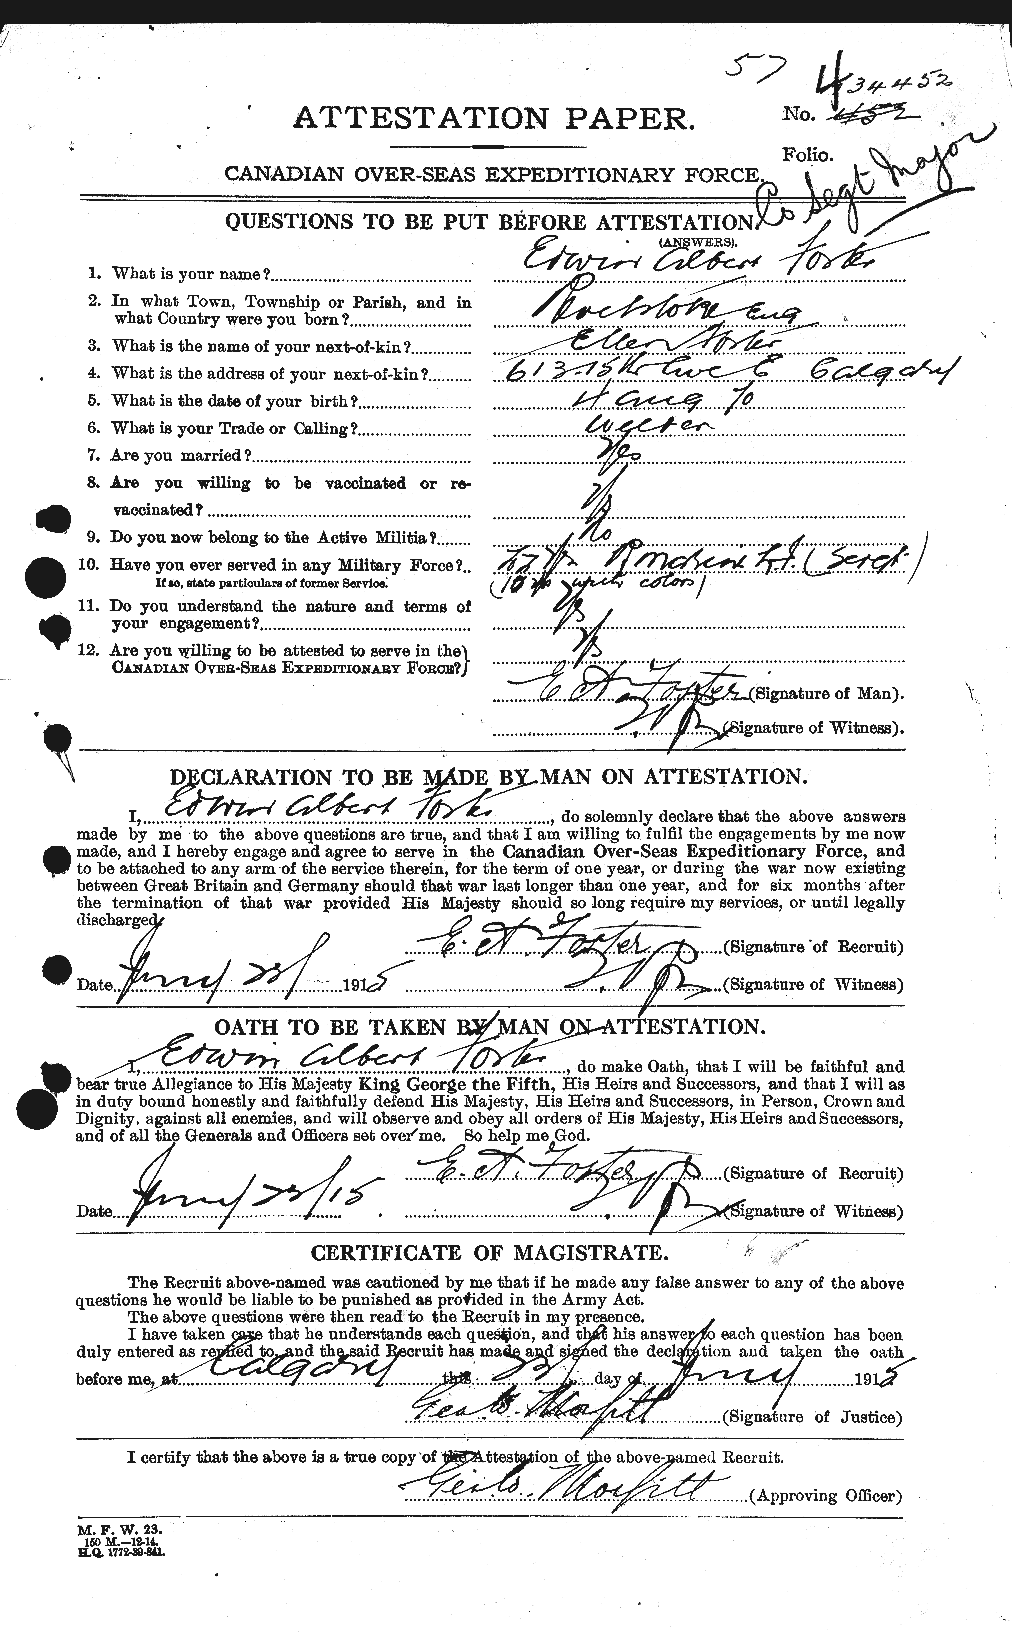 Personnel Records of the First World War - CEF 330591a